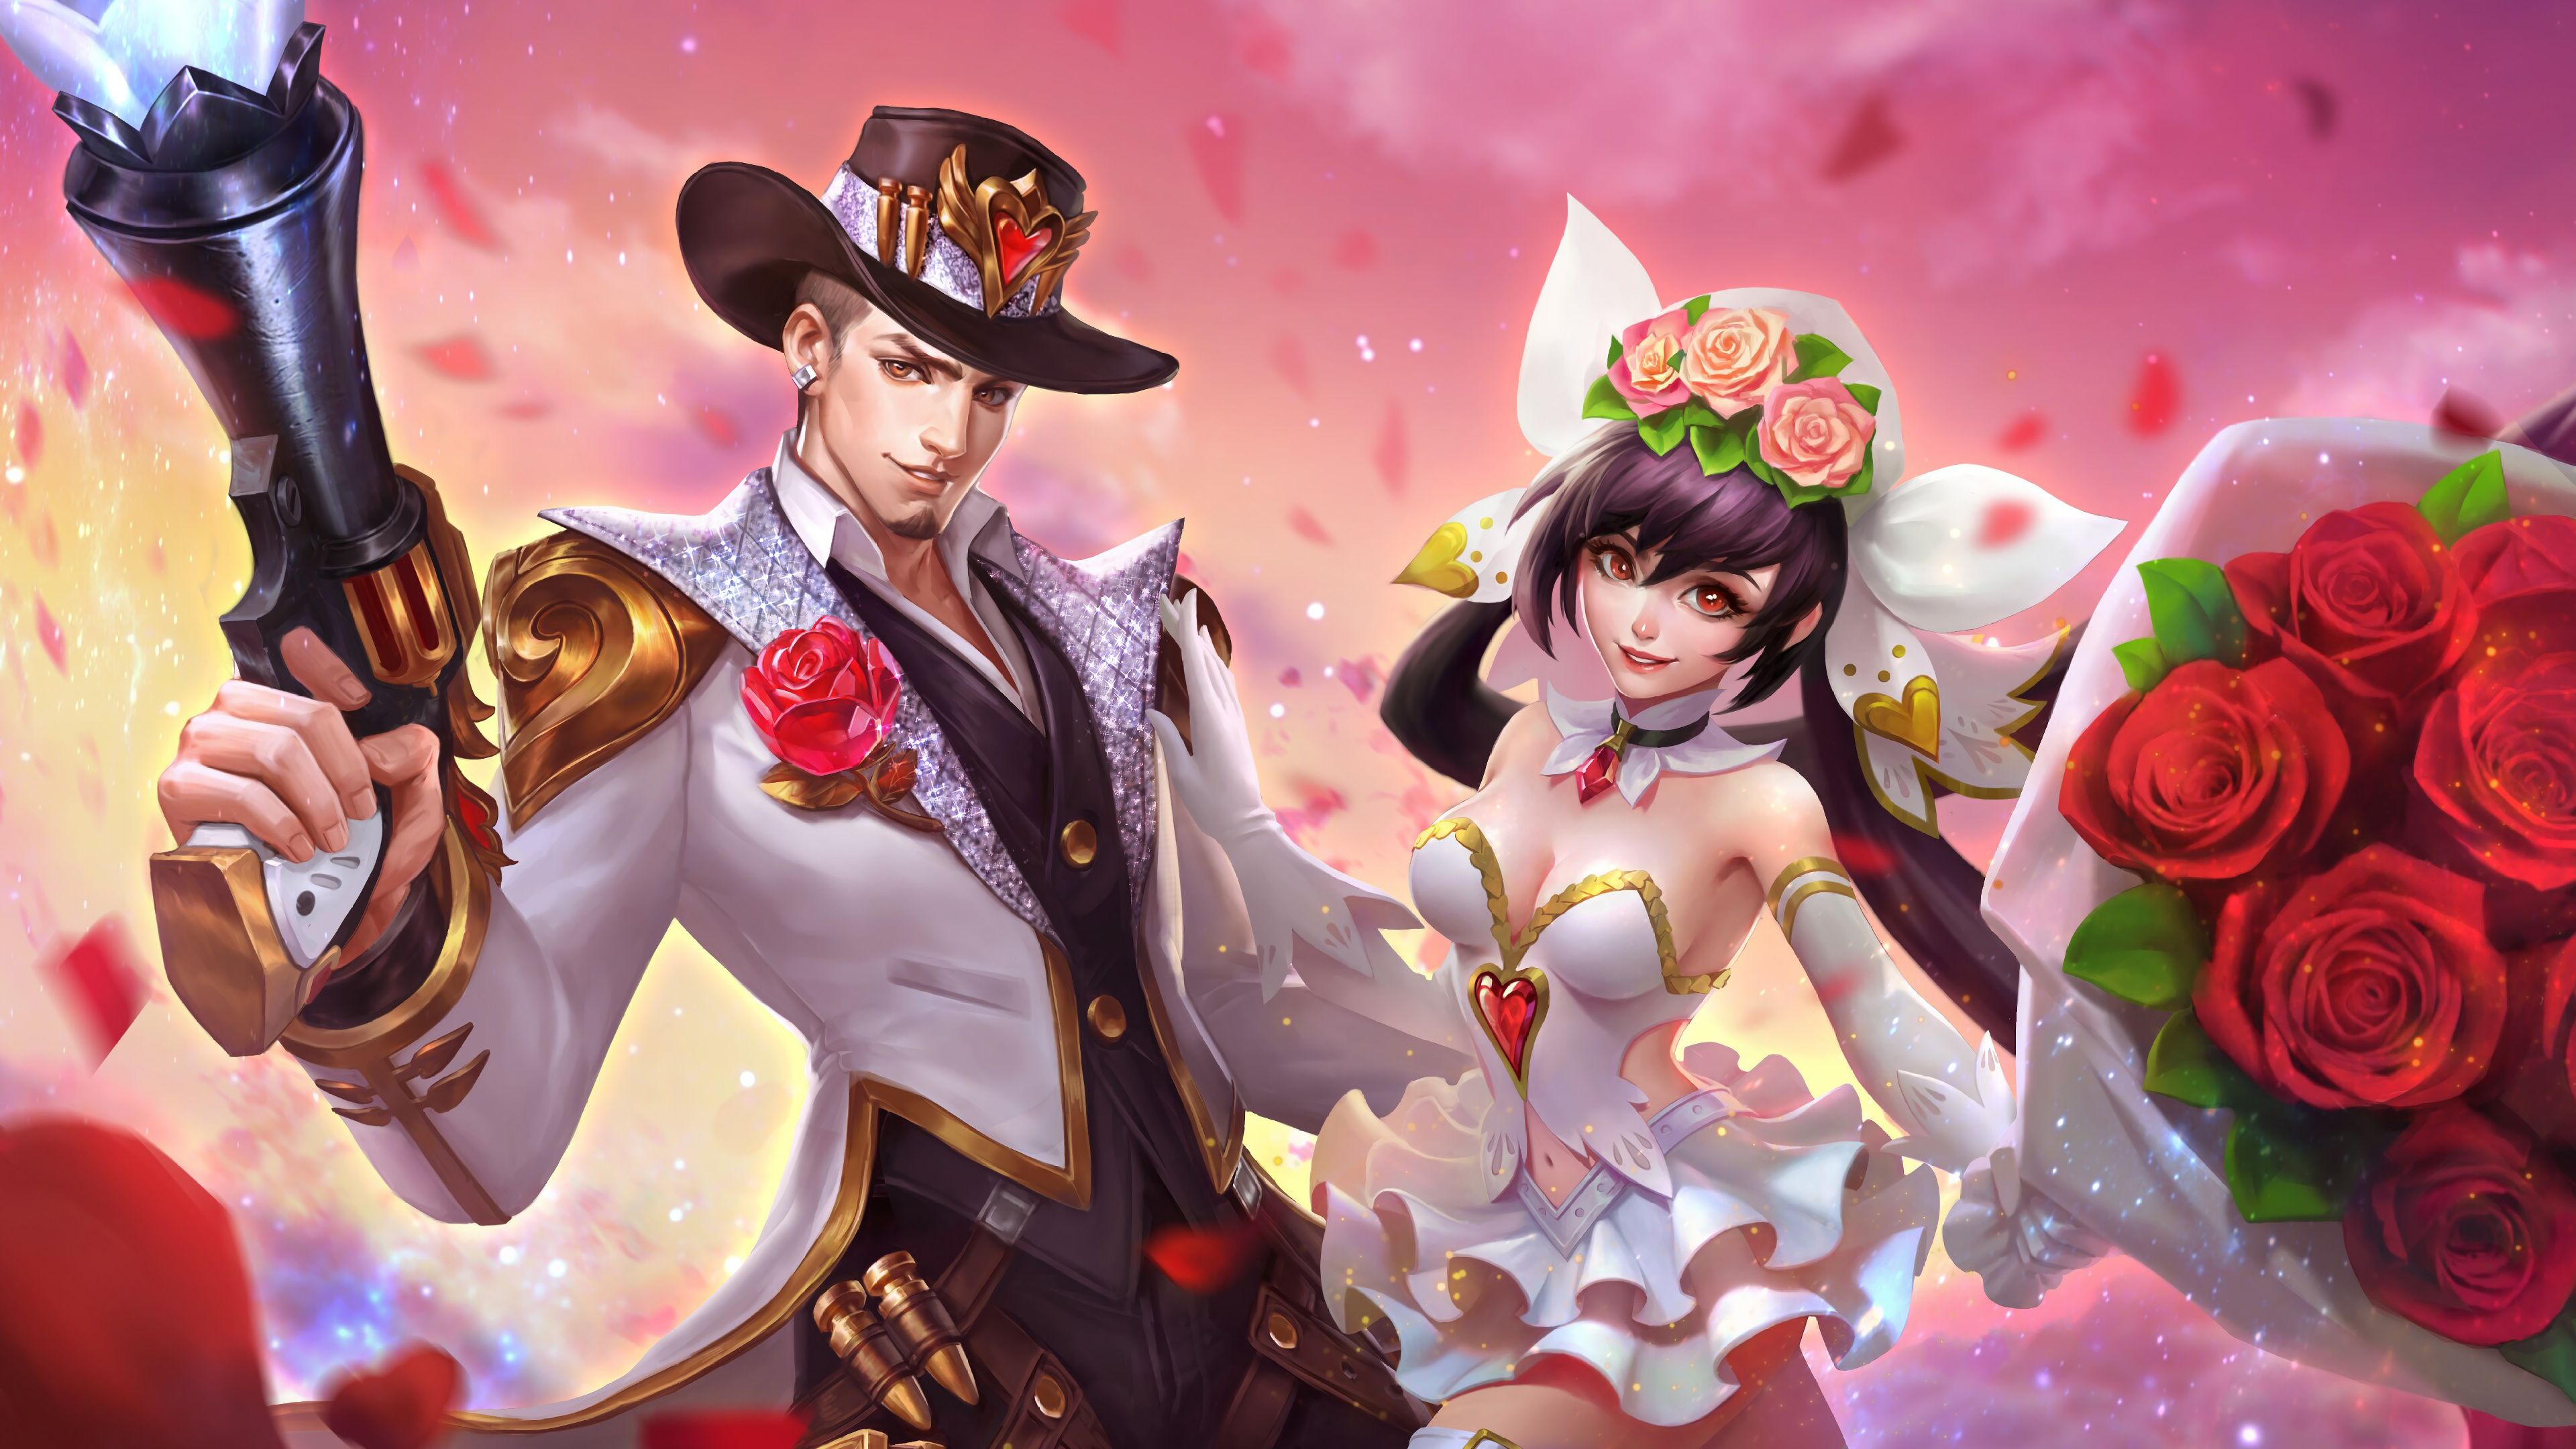 Clint, Gun And Roses, Layla, Cannon And Roses, Skins, Couple Mobile Legends HD Wallpaper